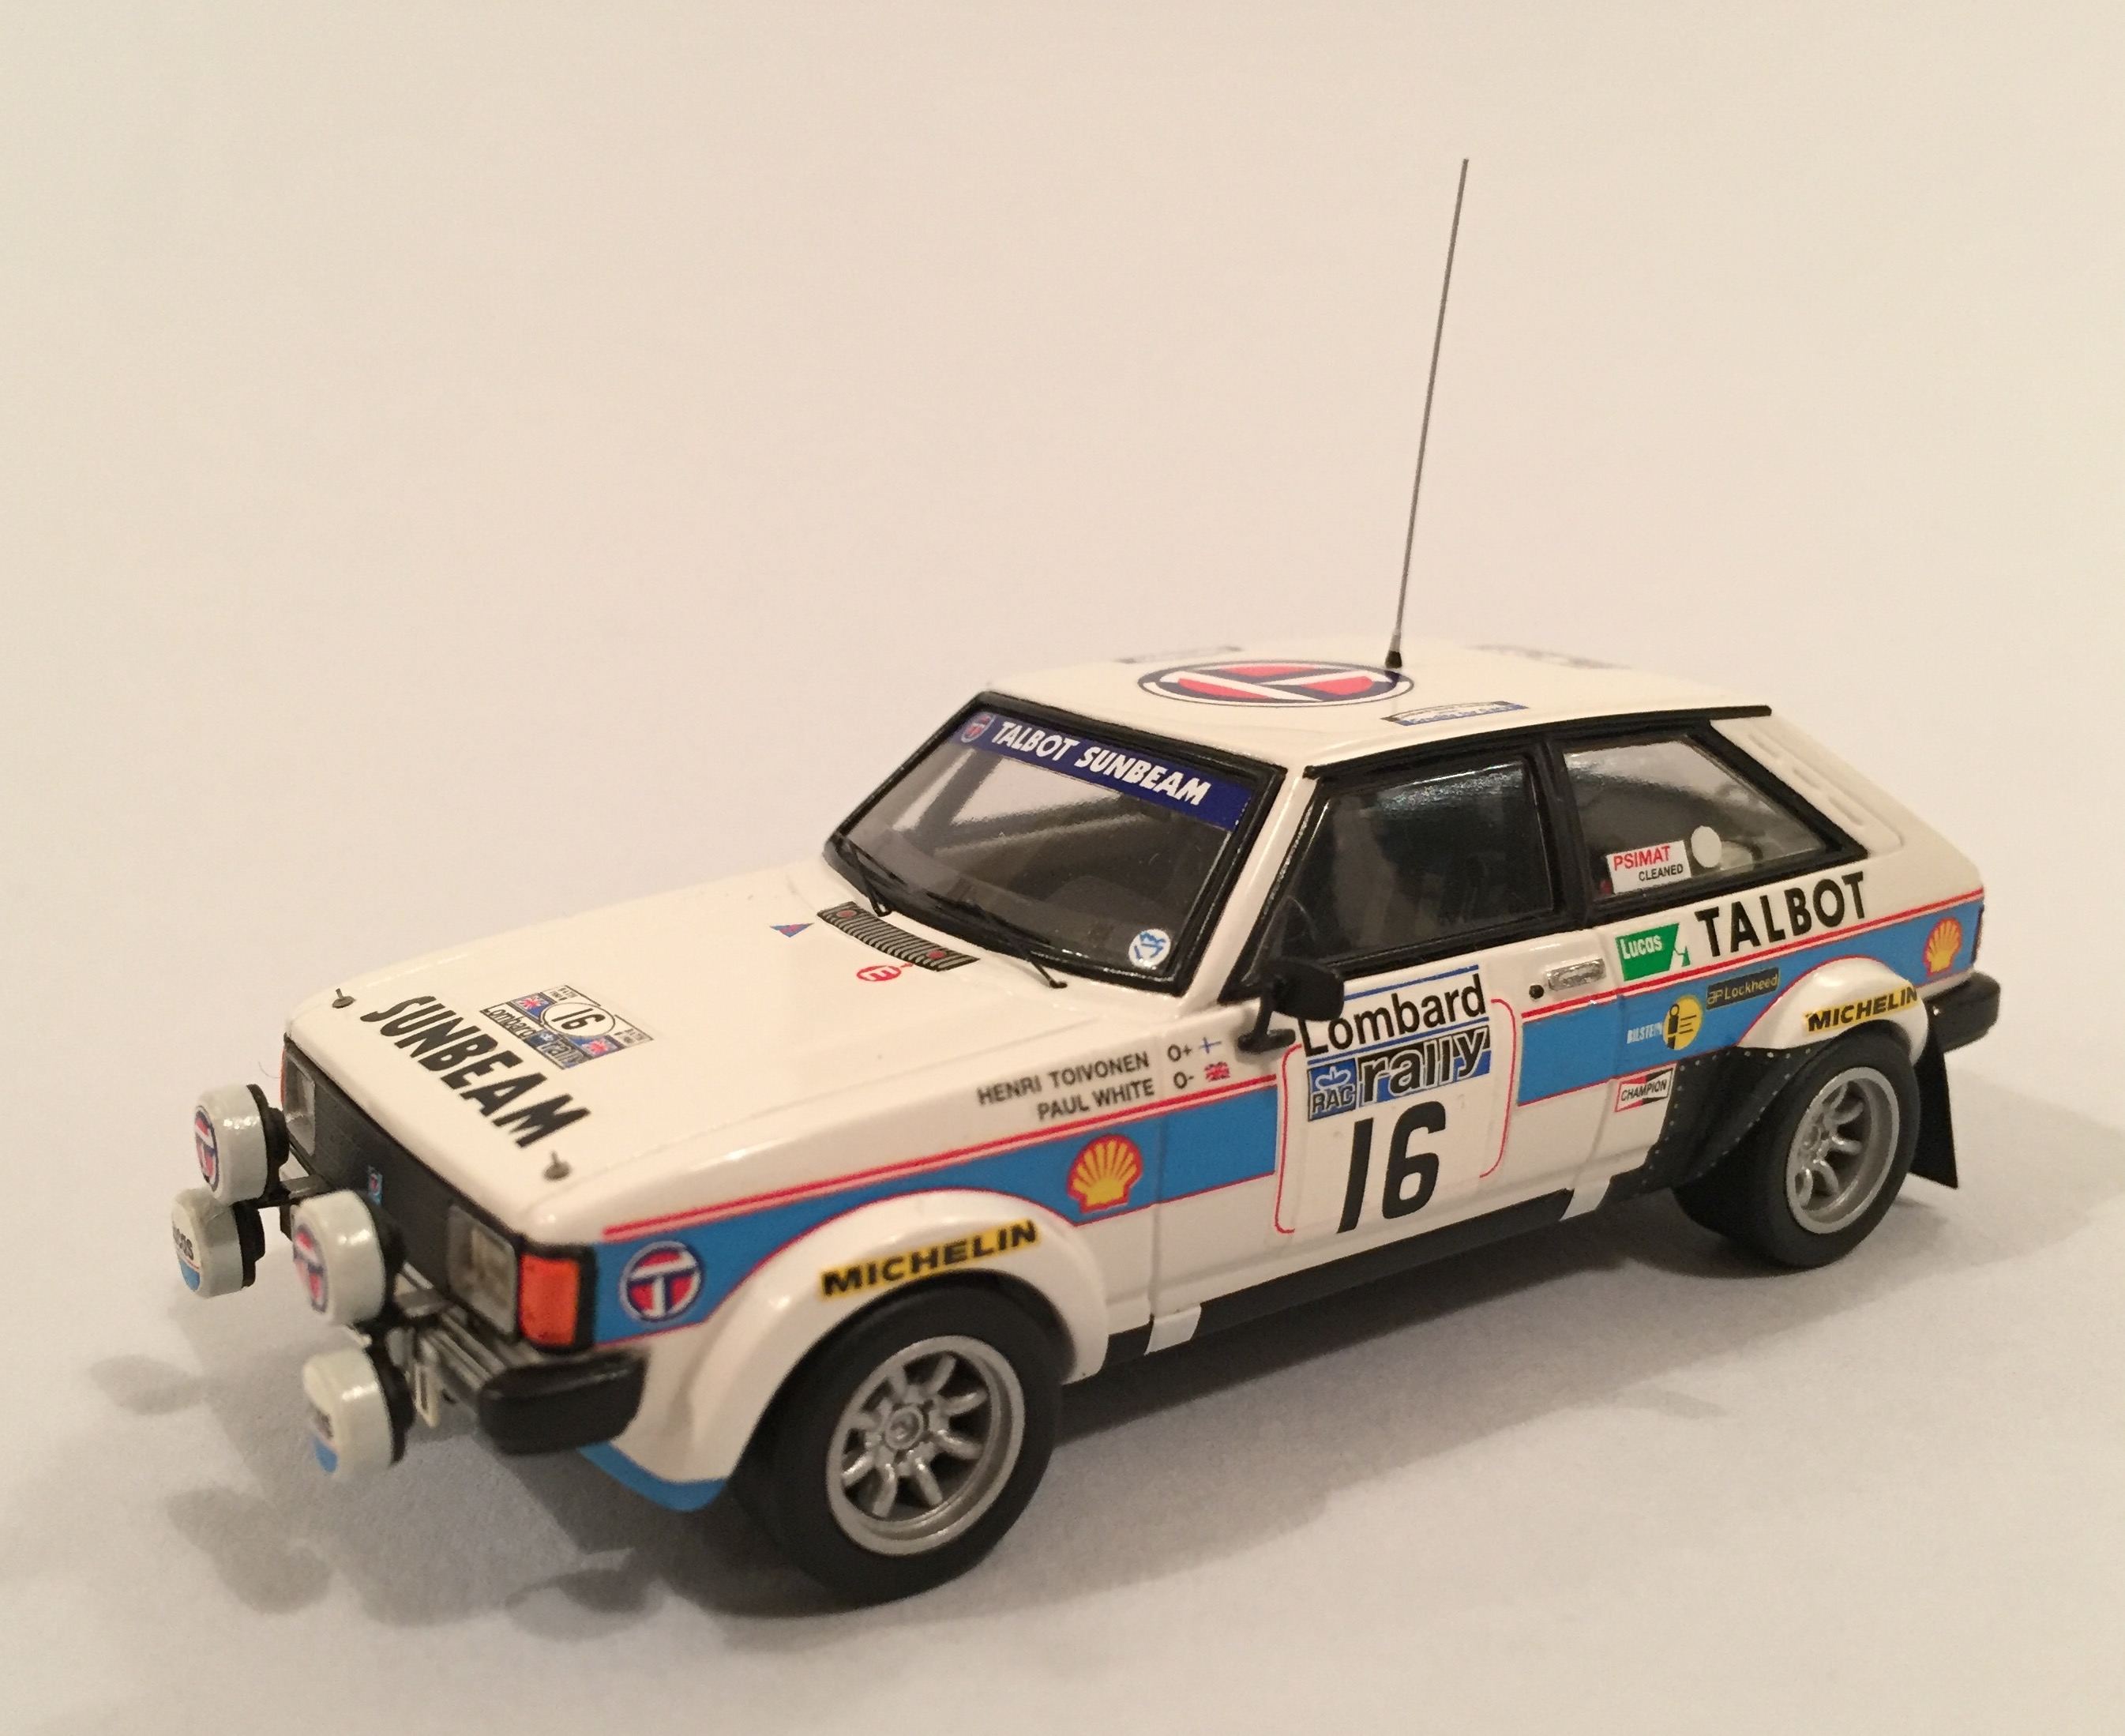 Pics of your models, please! - Page 132 - Scale Models - PistonHeads